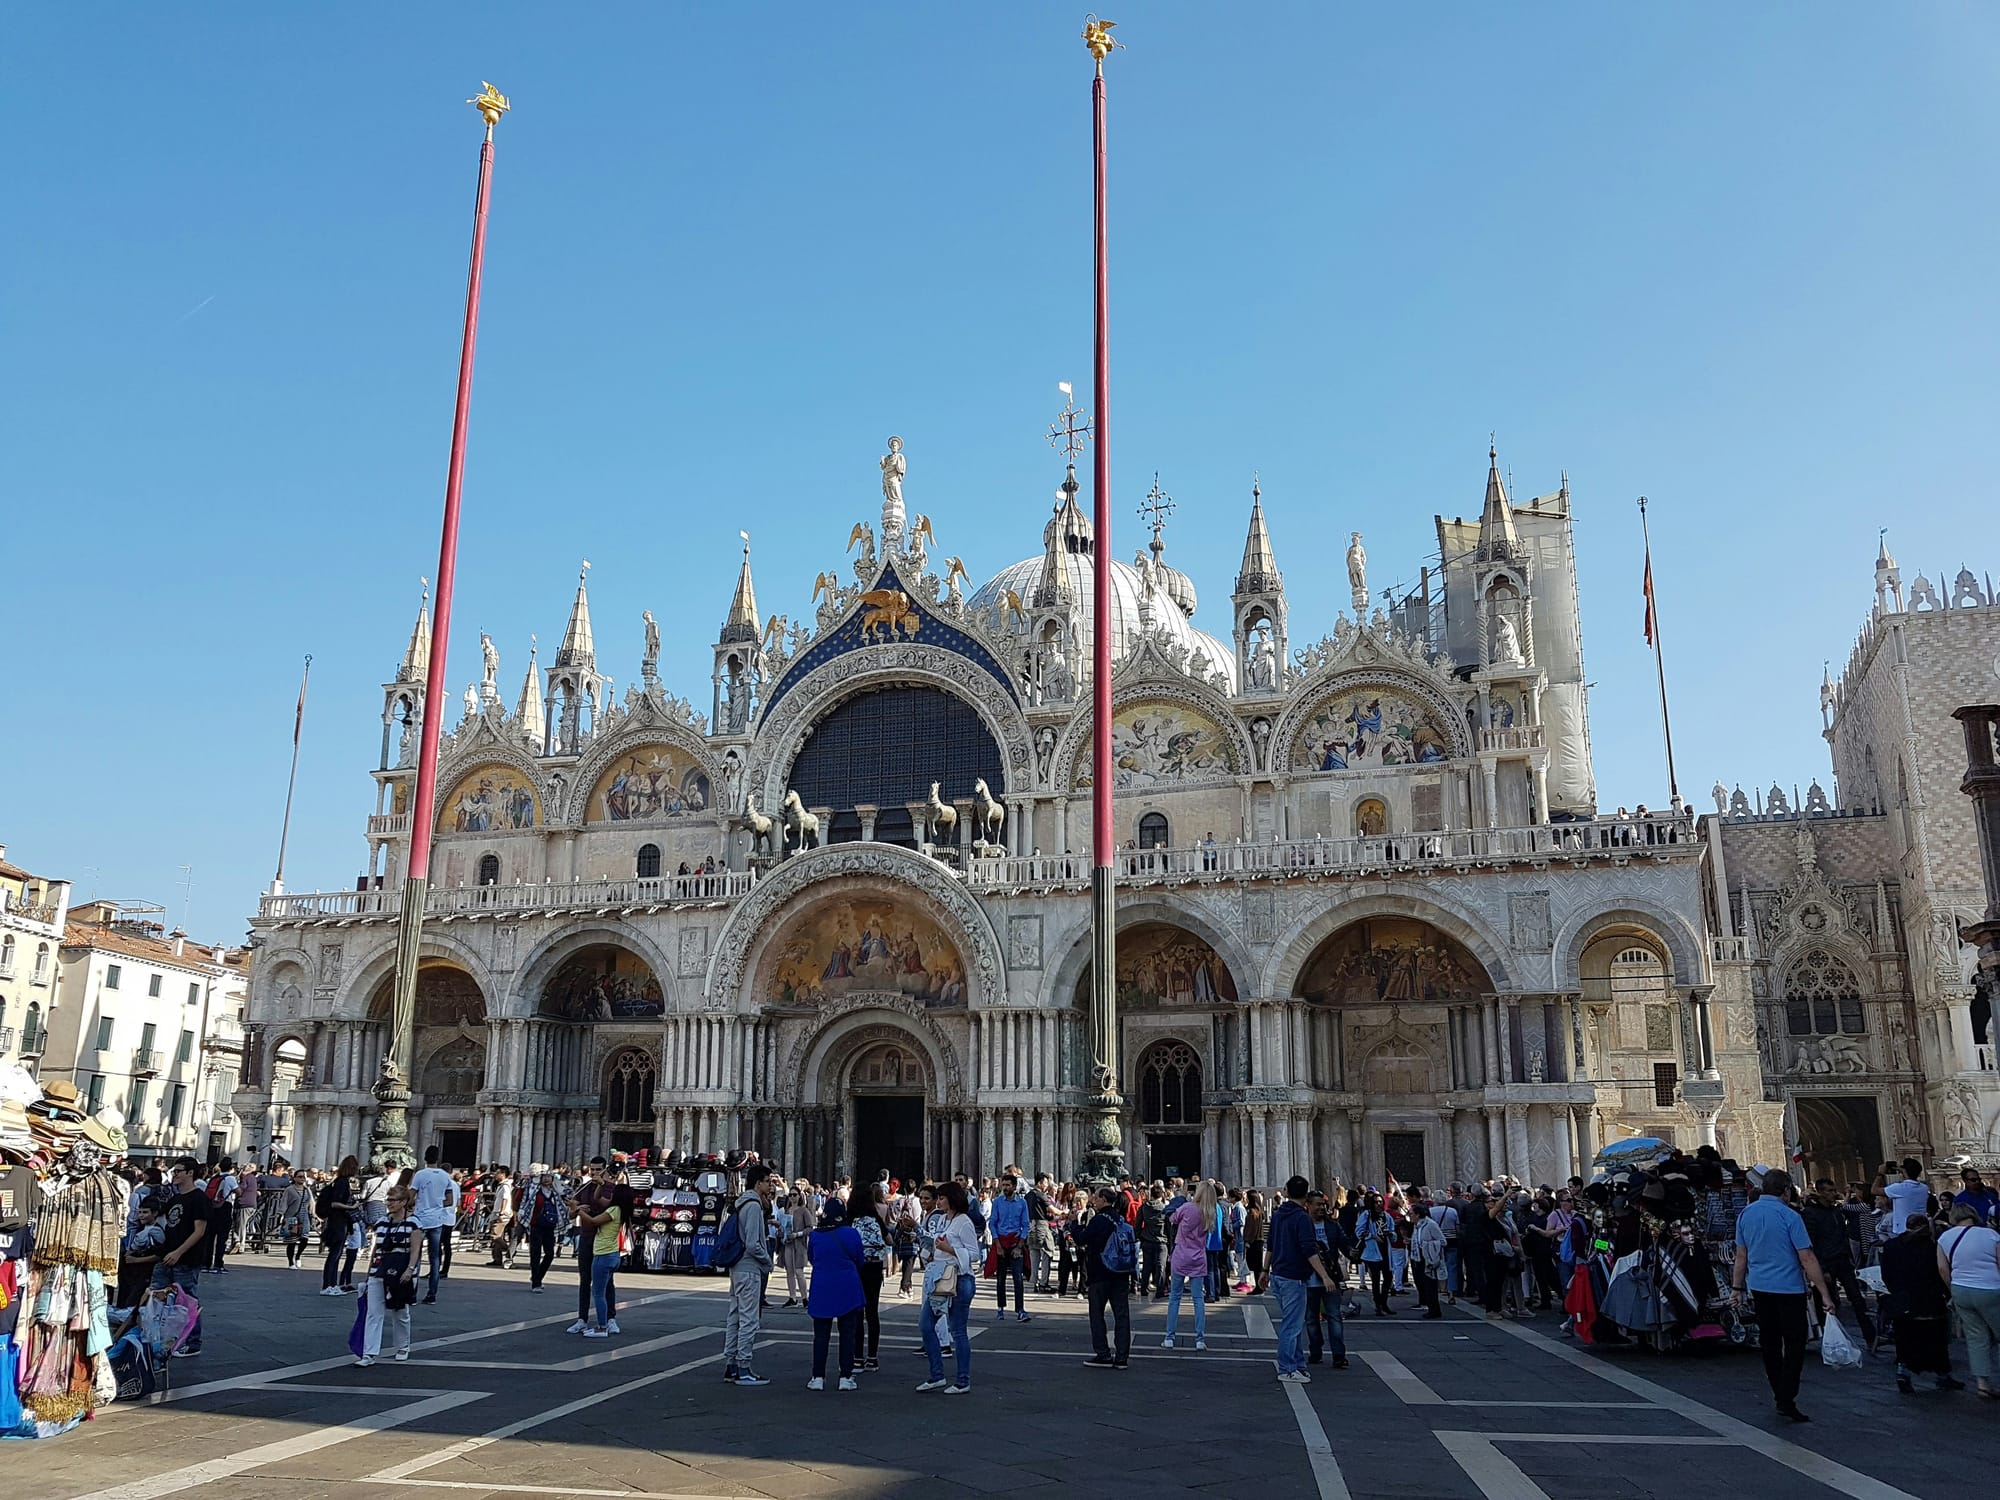 Guide to Wheelchair Accessible Venice, Italy